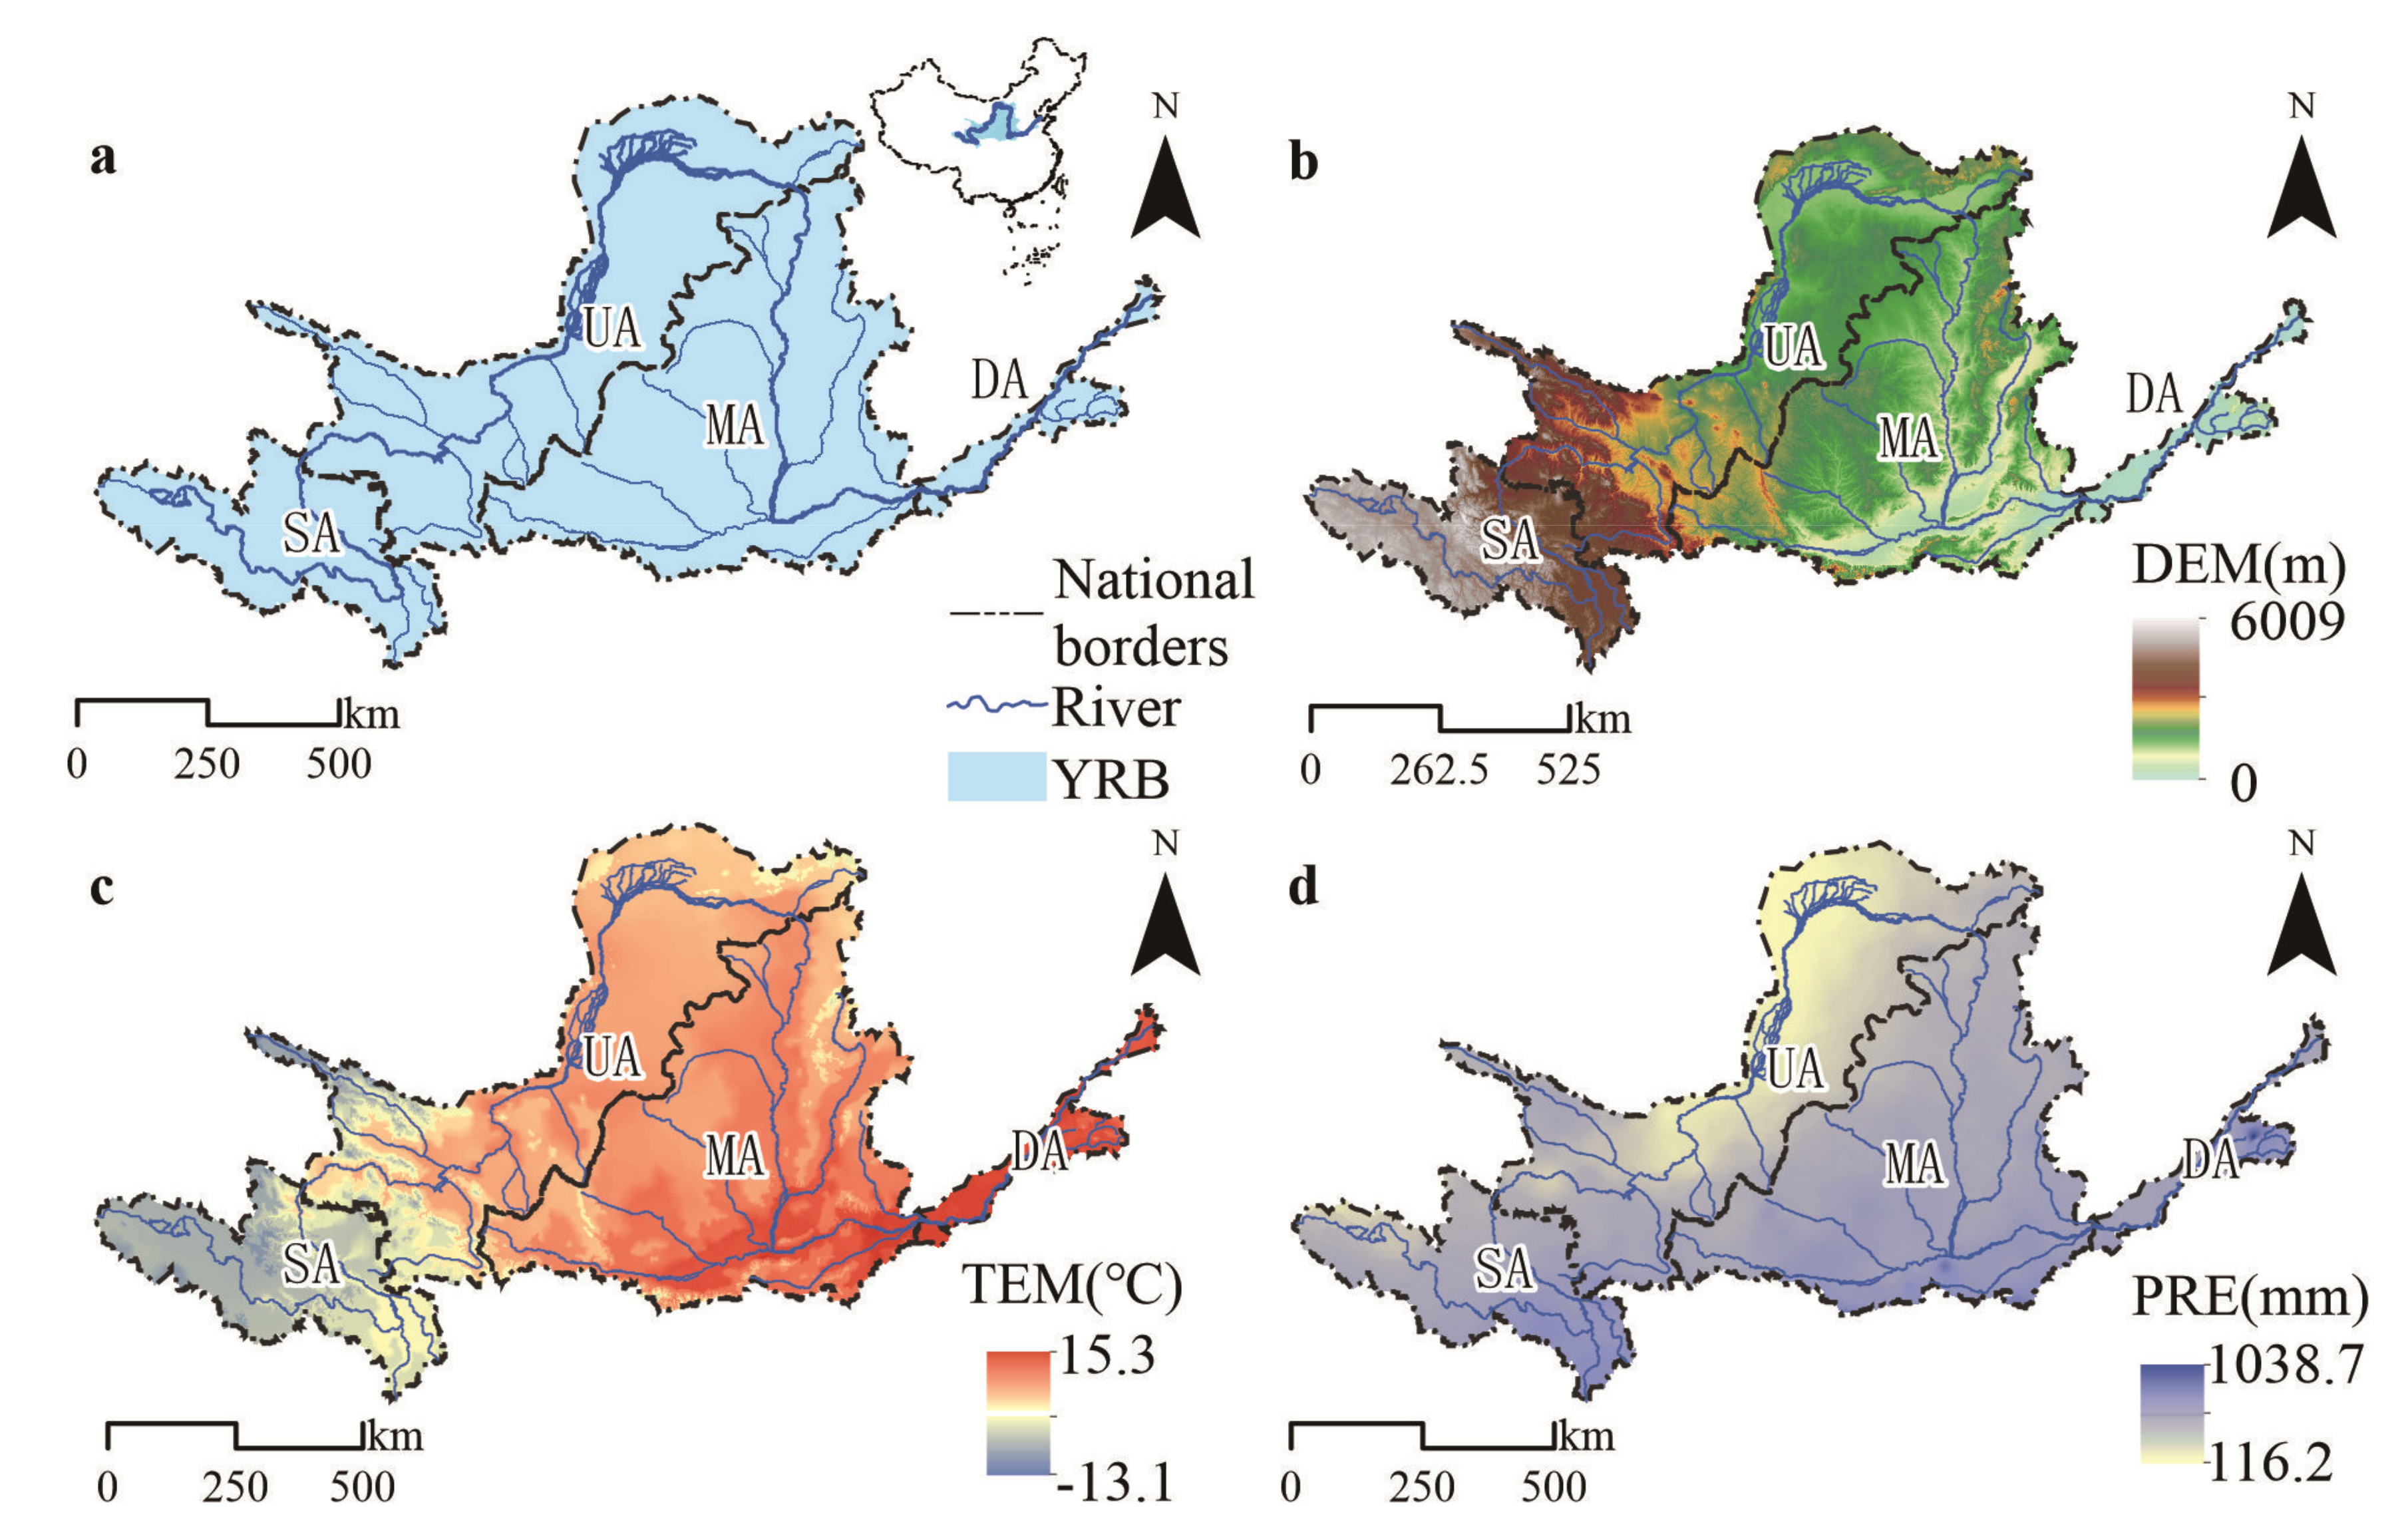 The Transfer value of information collected on representative basins